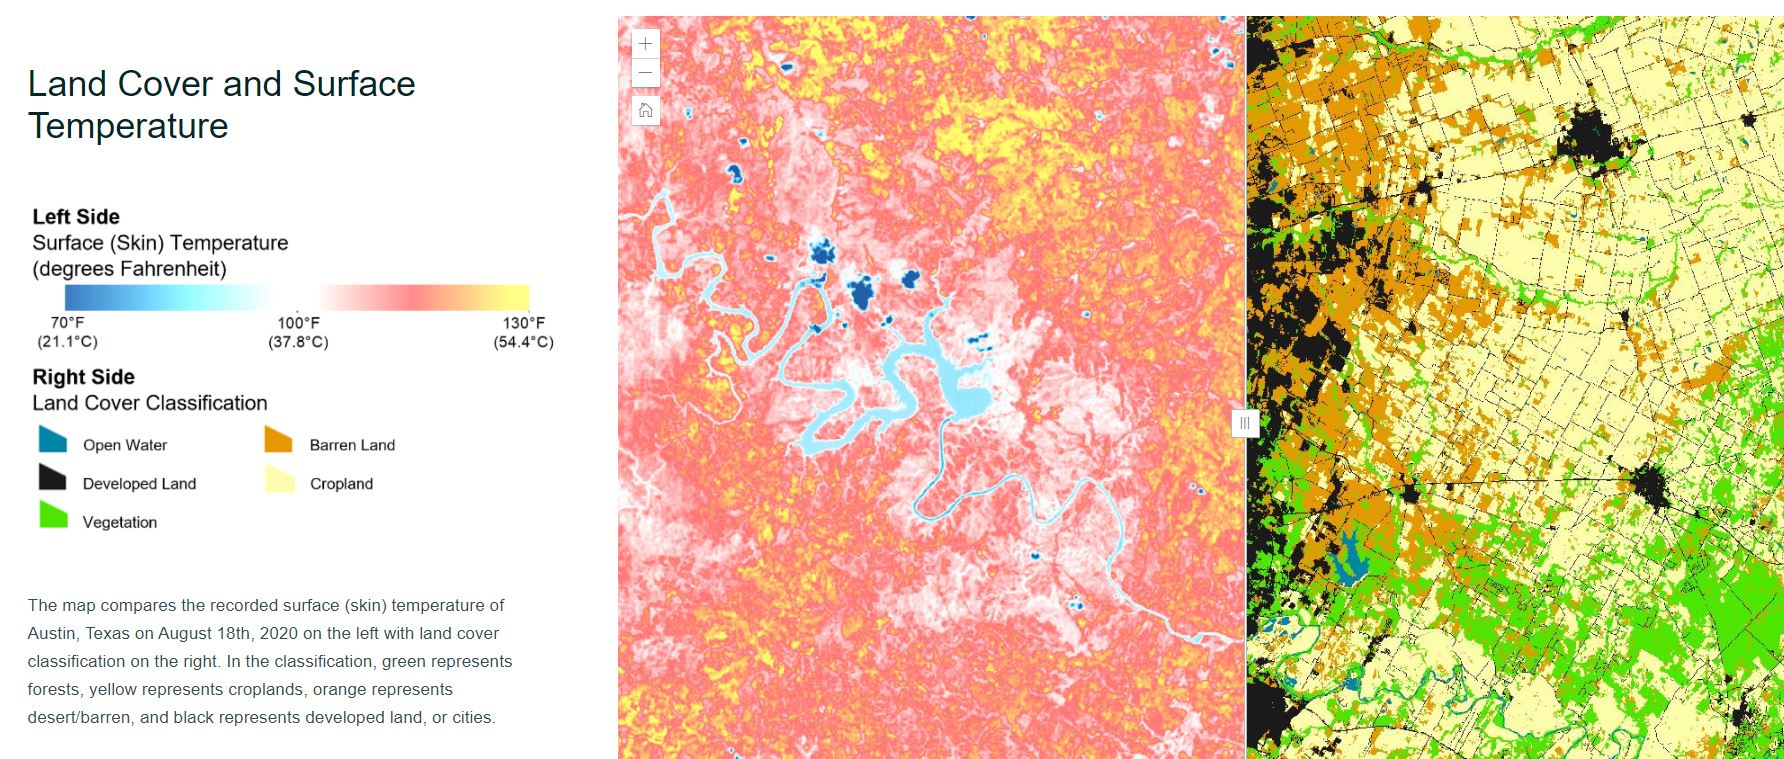 Surface (skin) temperature and land cover classification